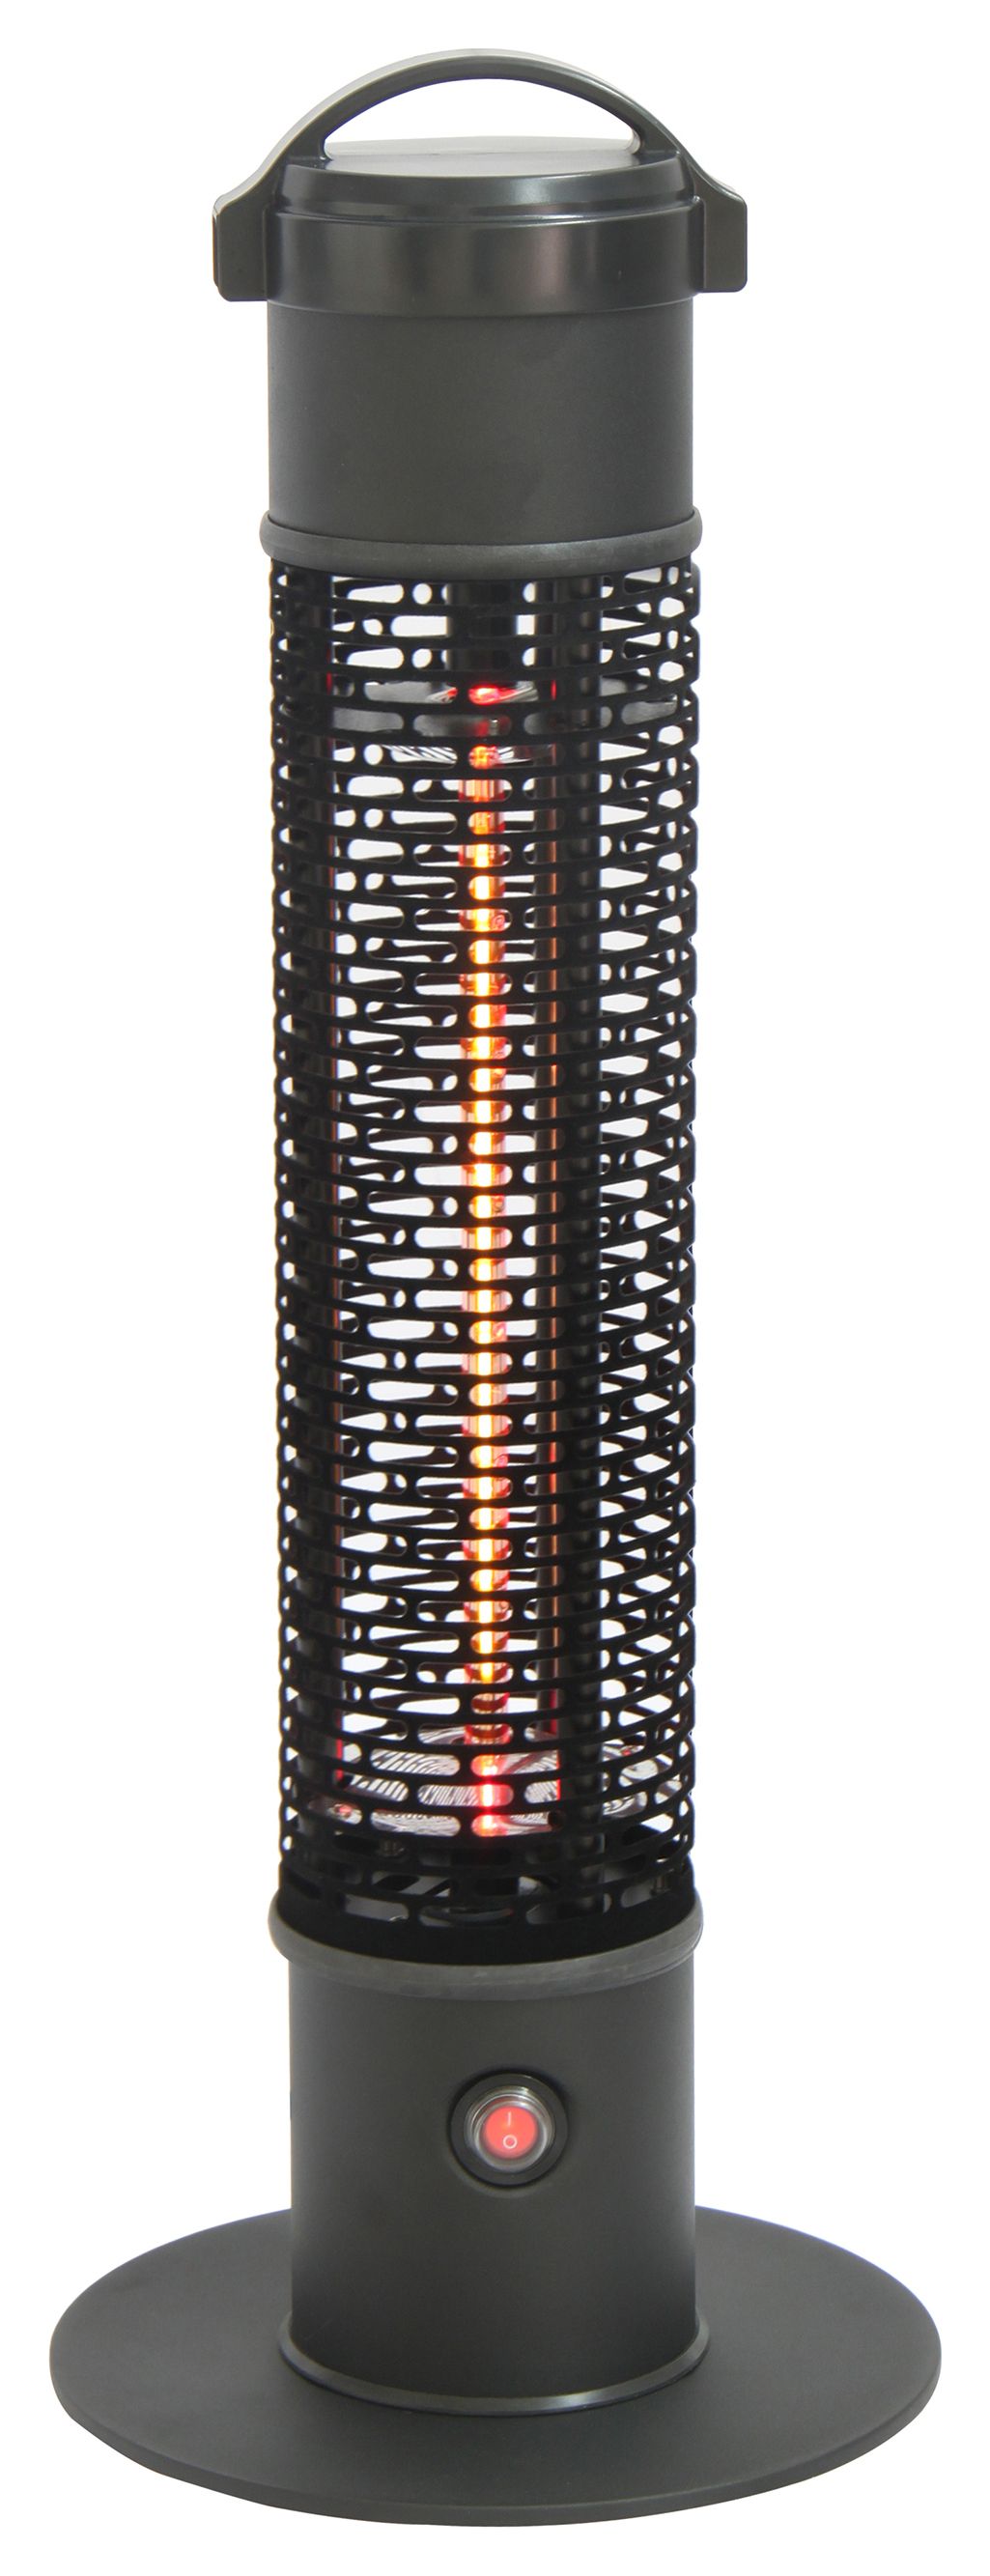 Charles Bentley 1200W Electric Outdoor Tower Patio Heater